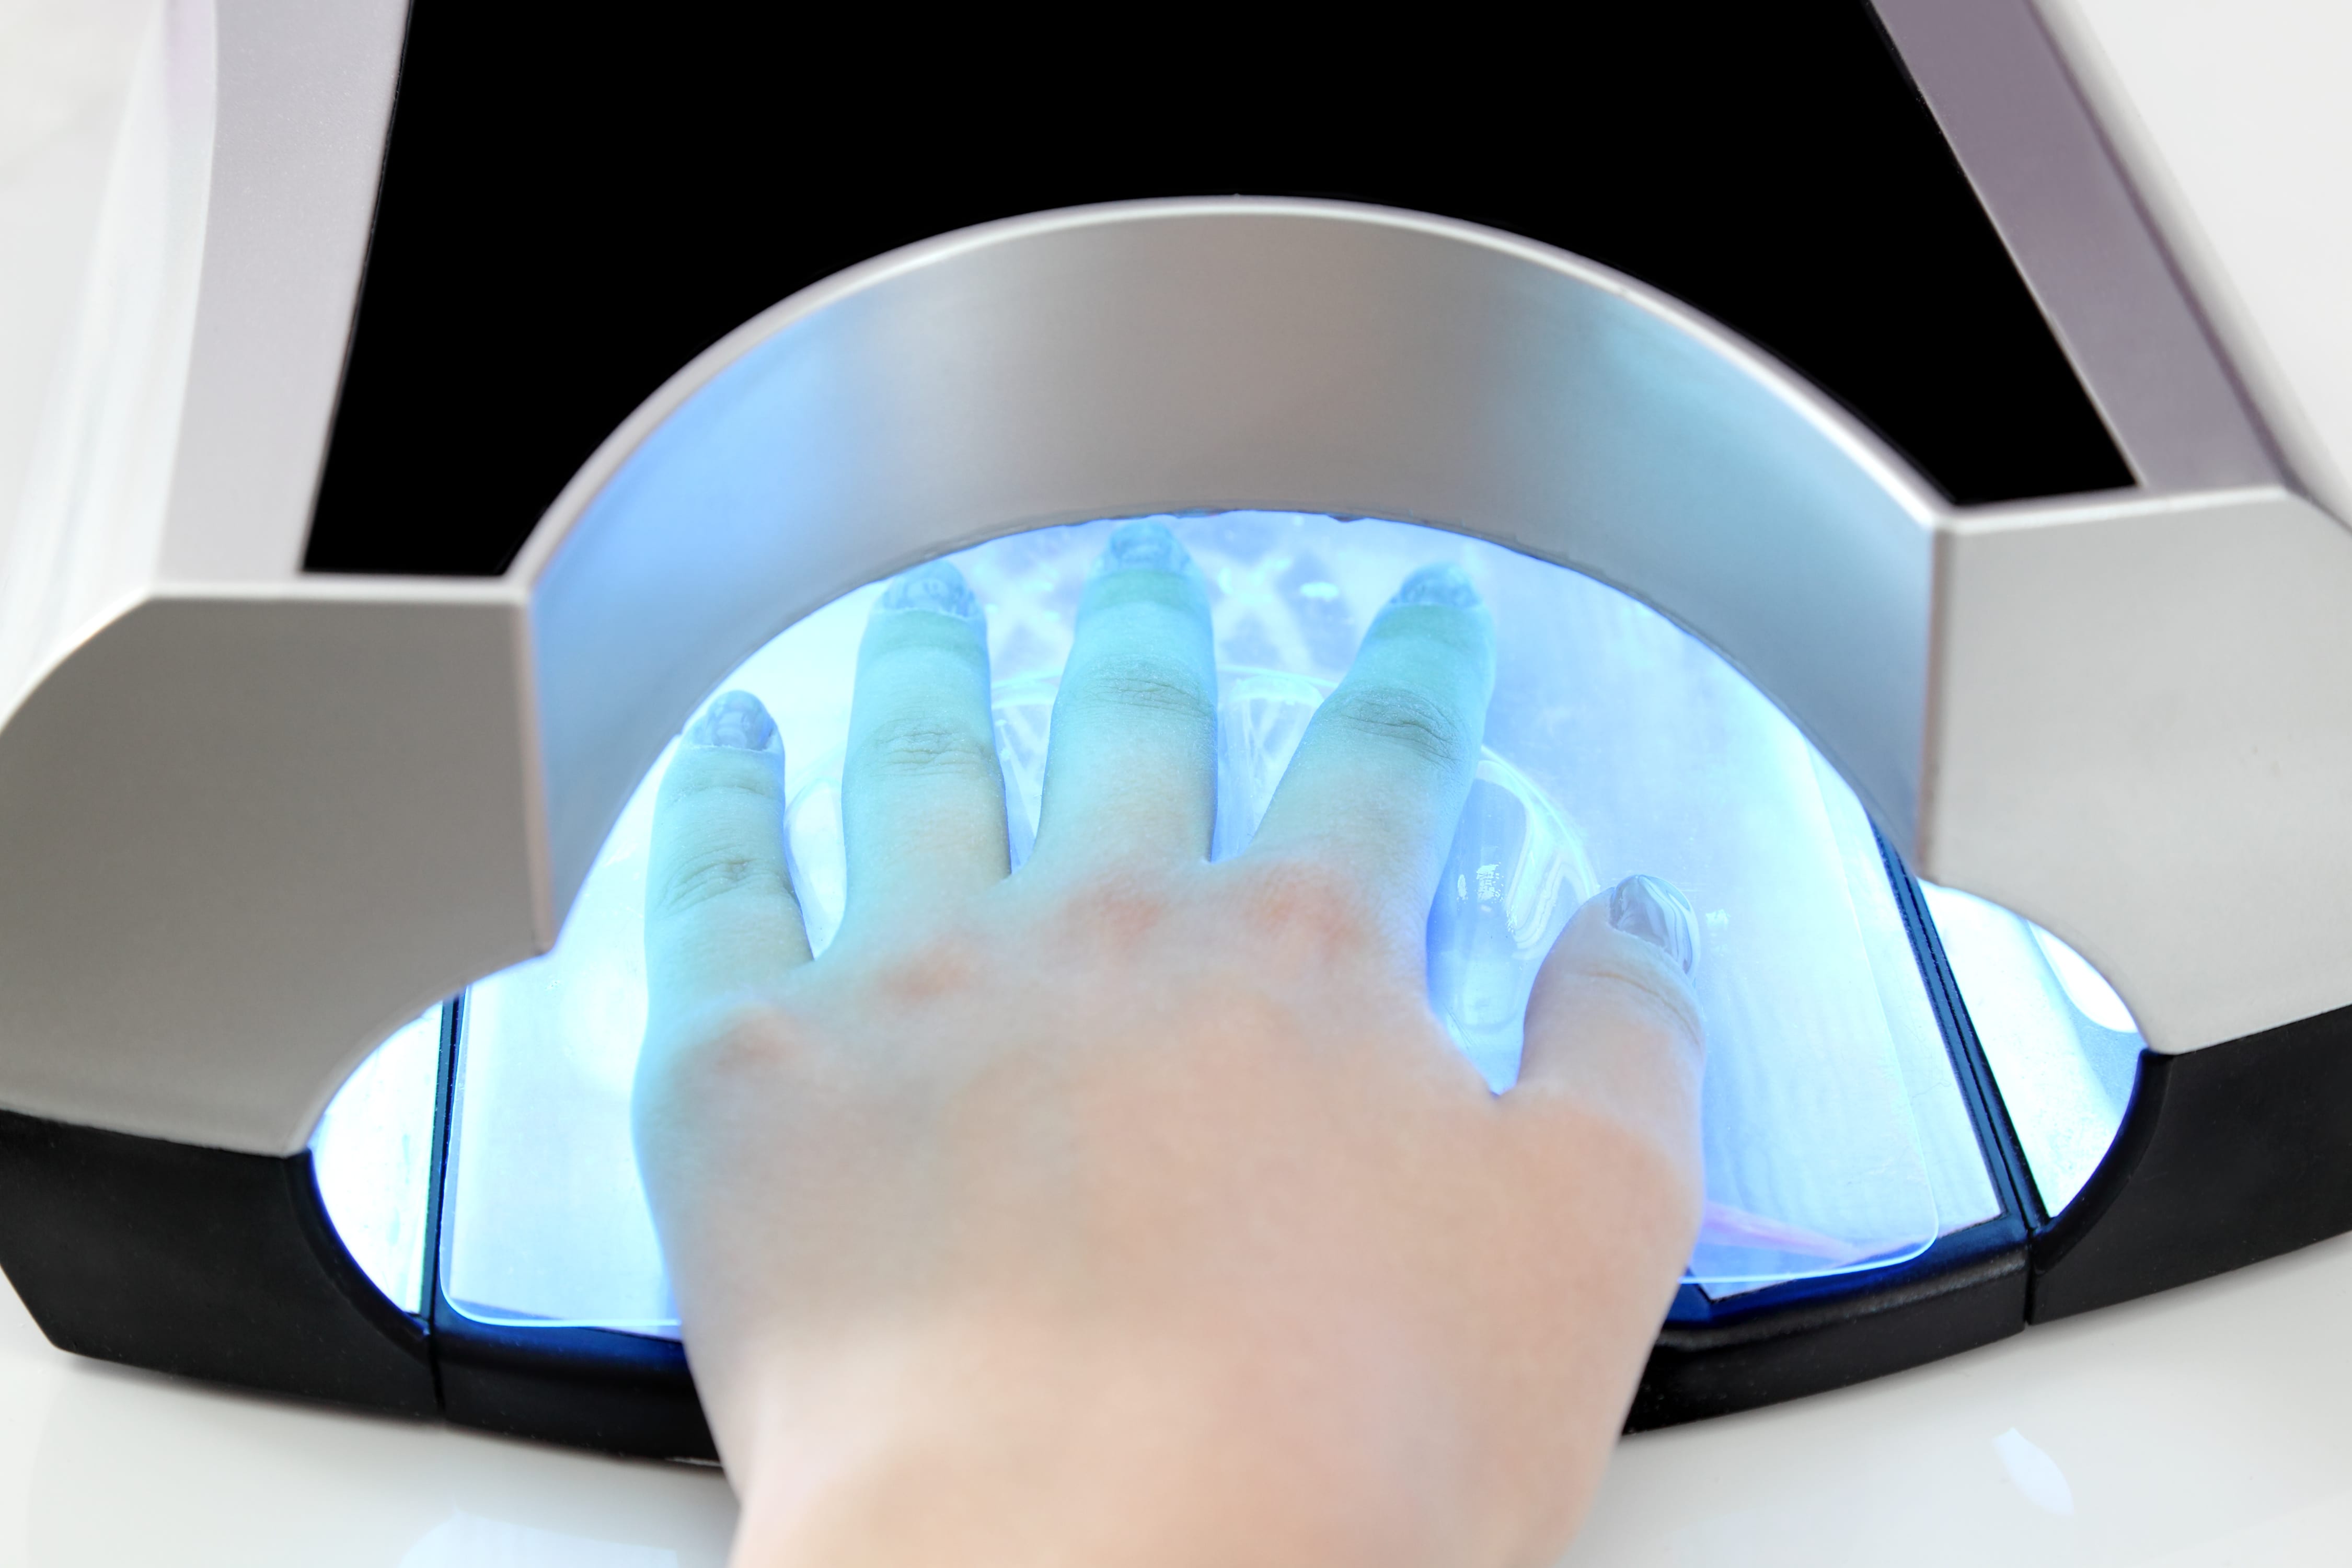 Finger nail treatment, lacquer dry with UV lamp, beauty makeup